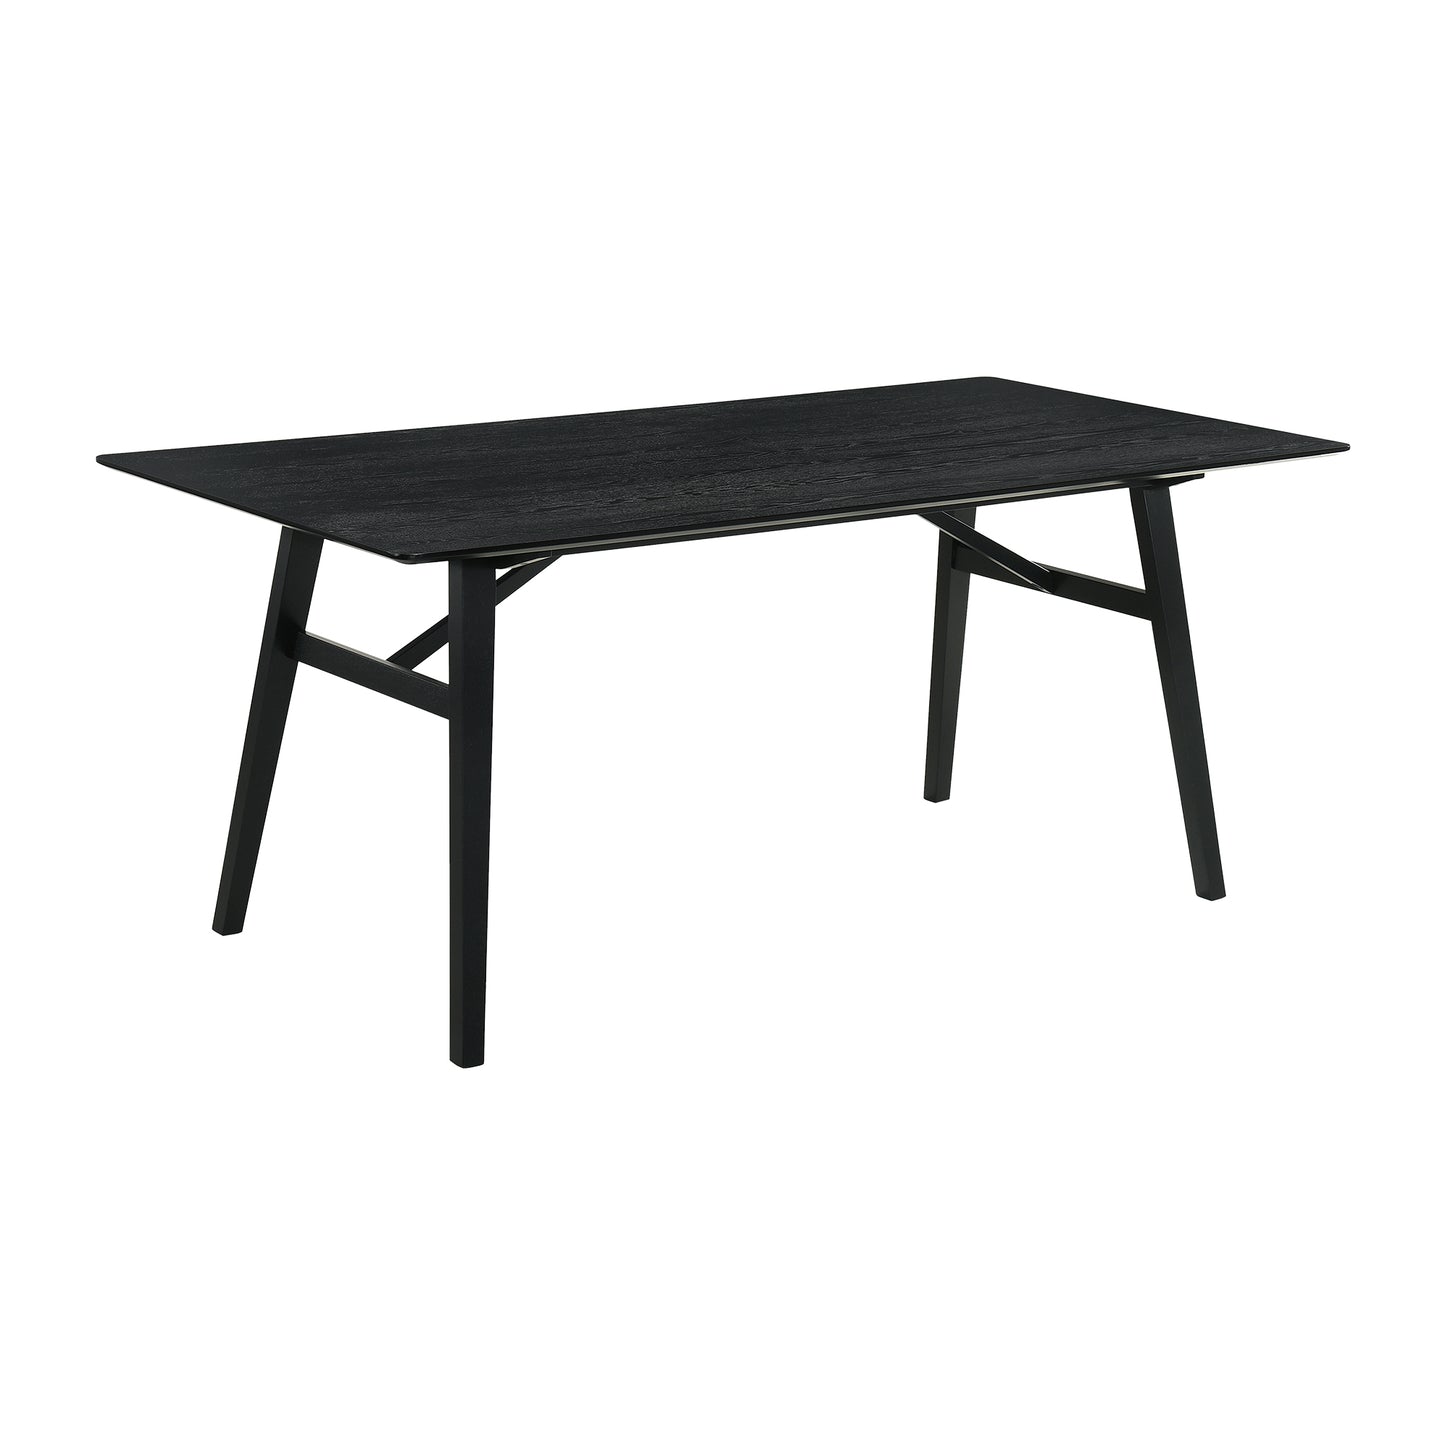 Channell 5 Piece Black Wood Dining Table Set with Benches in Charcoal Fabric